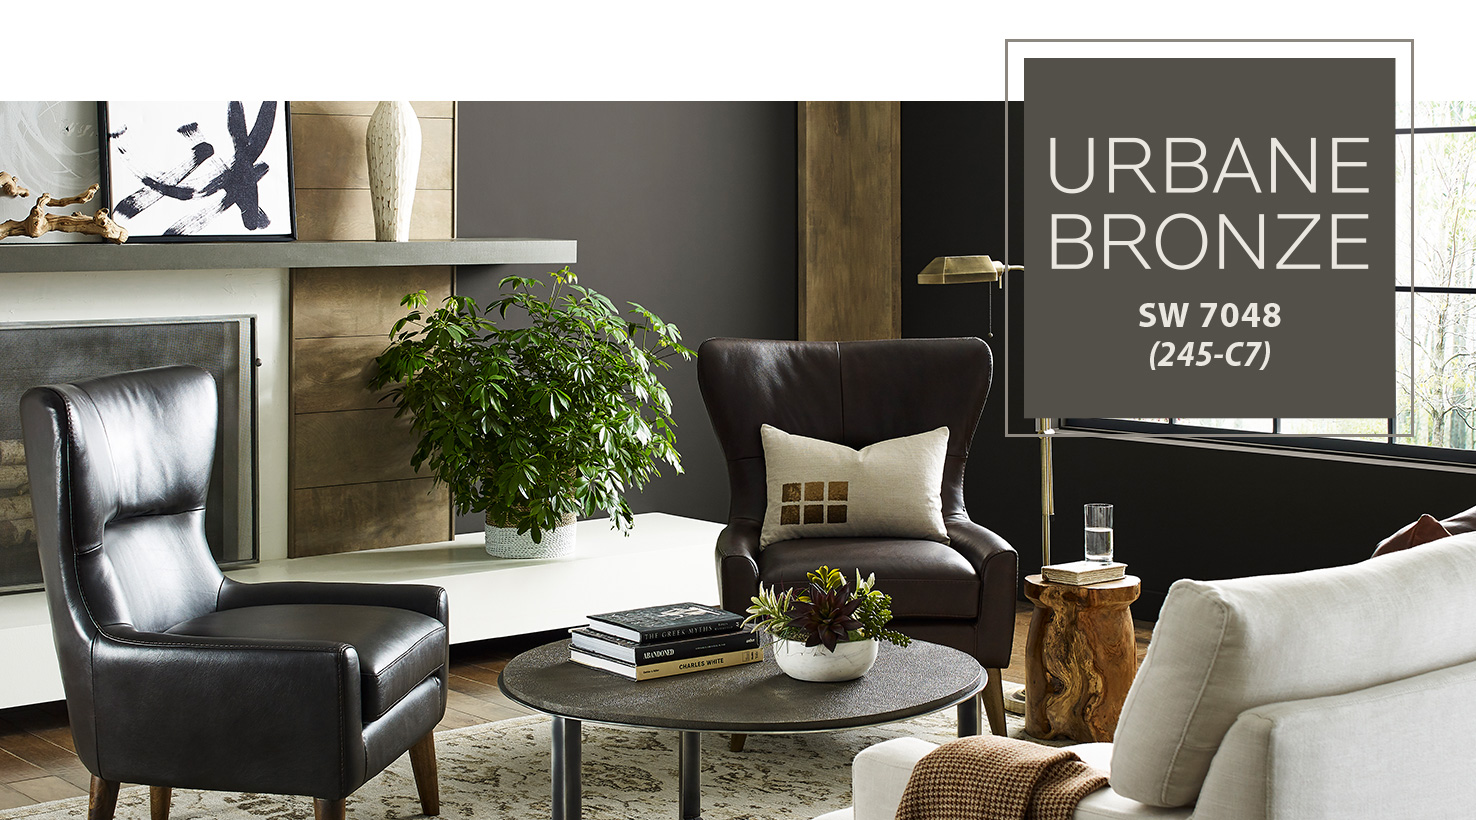 2021 Color Of The Year Urbane Bronze, Best Neutral Living Room Paint Colors 2021